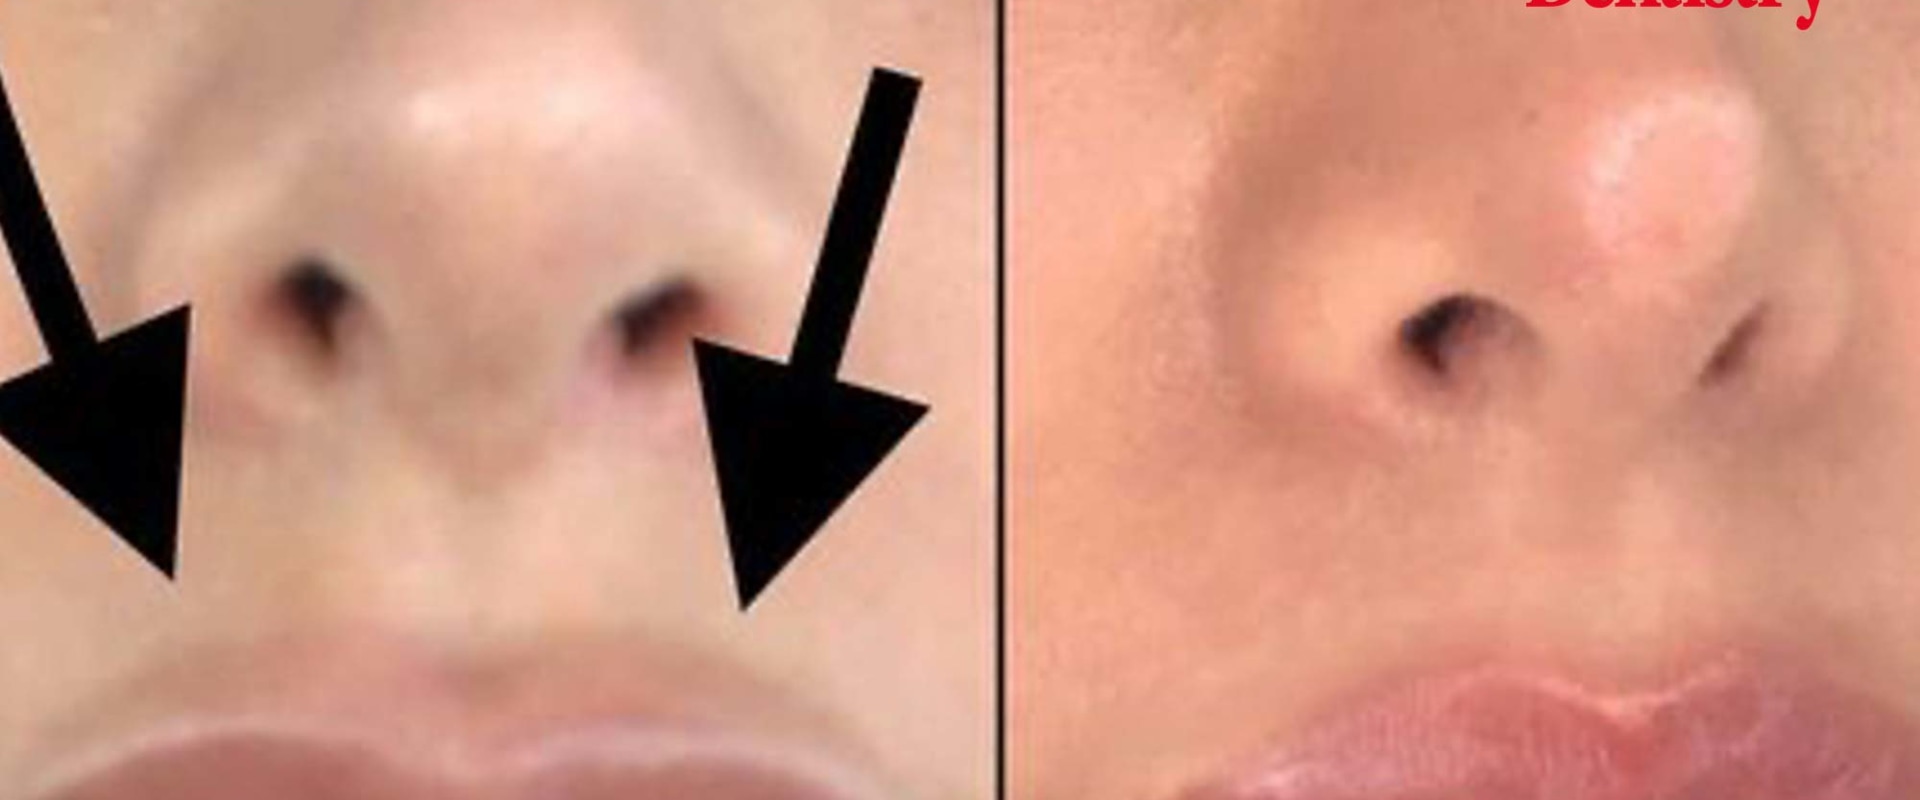 How Long Does It Take for Filler to Dissolve After Injection?